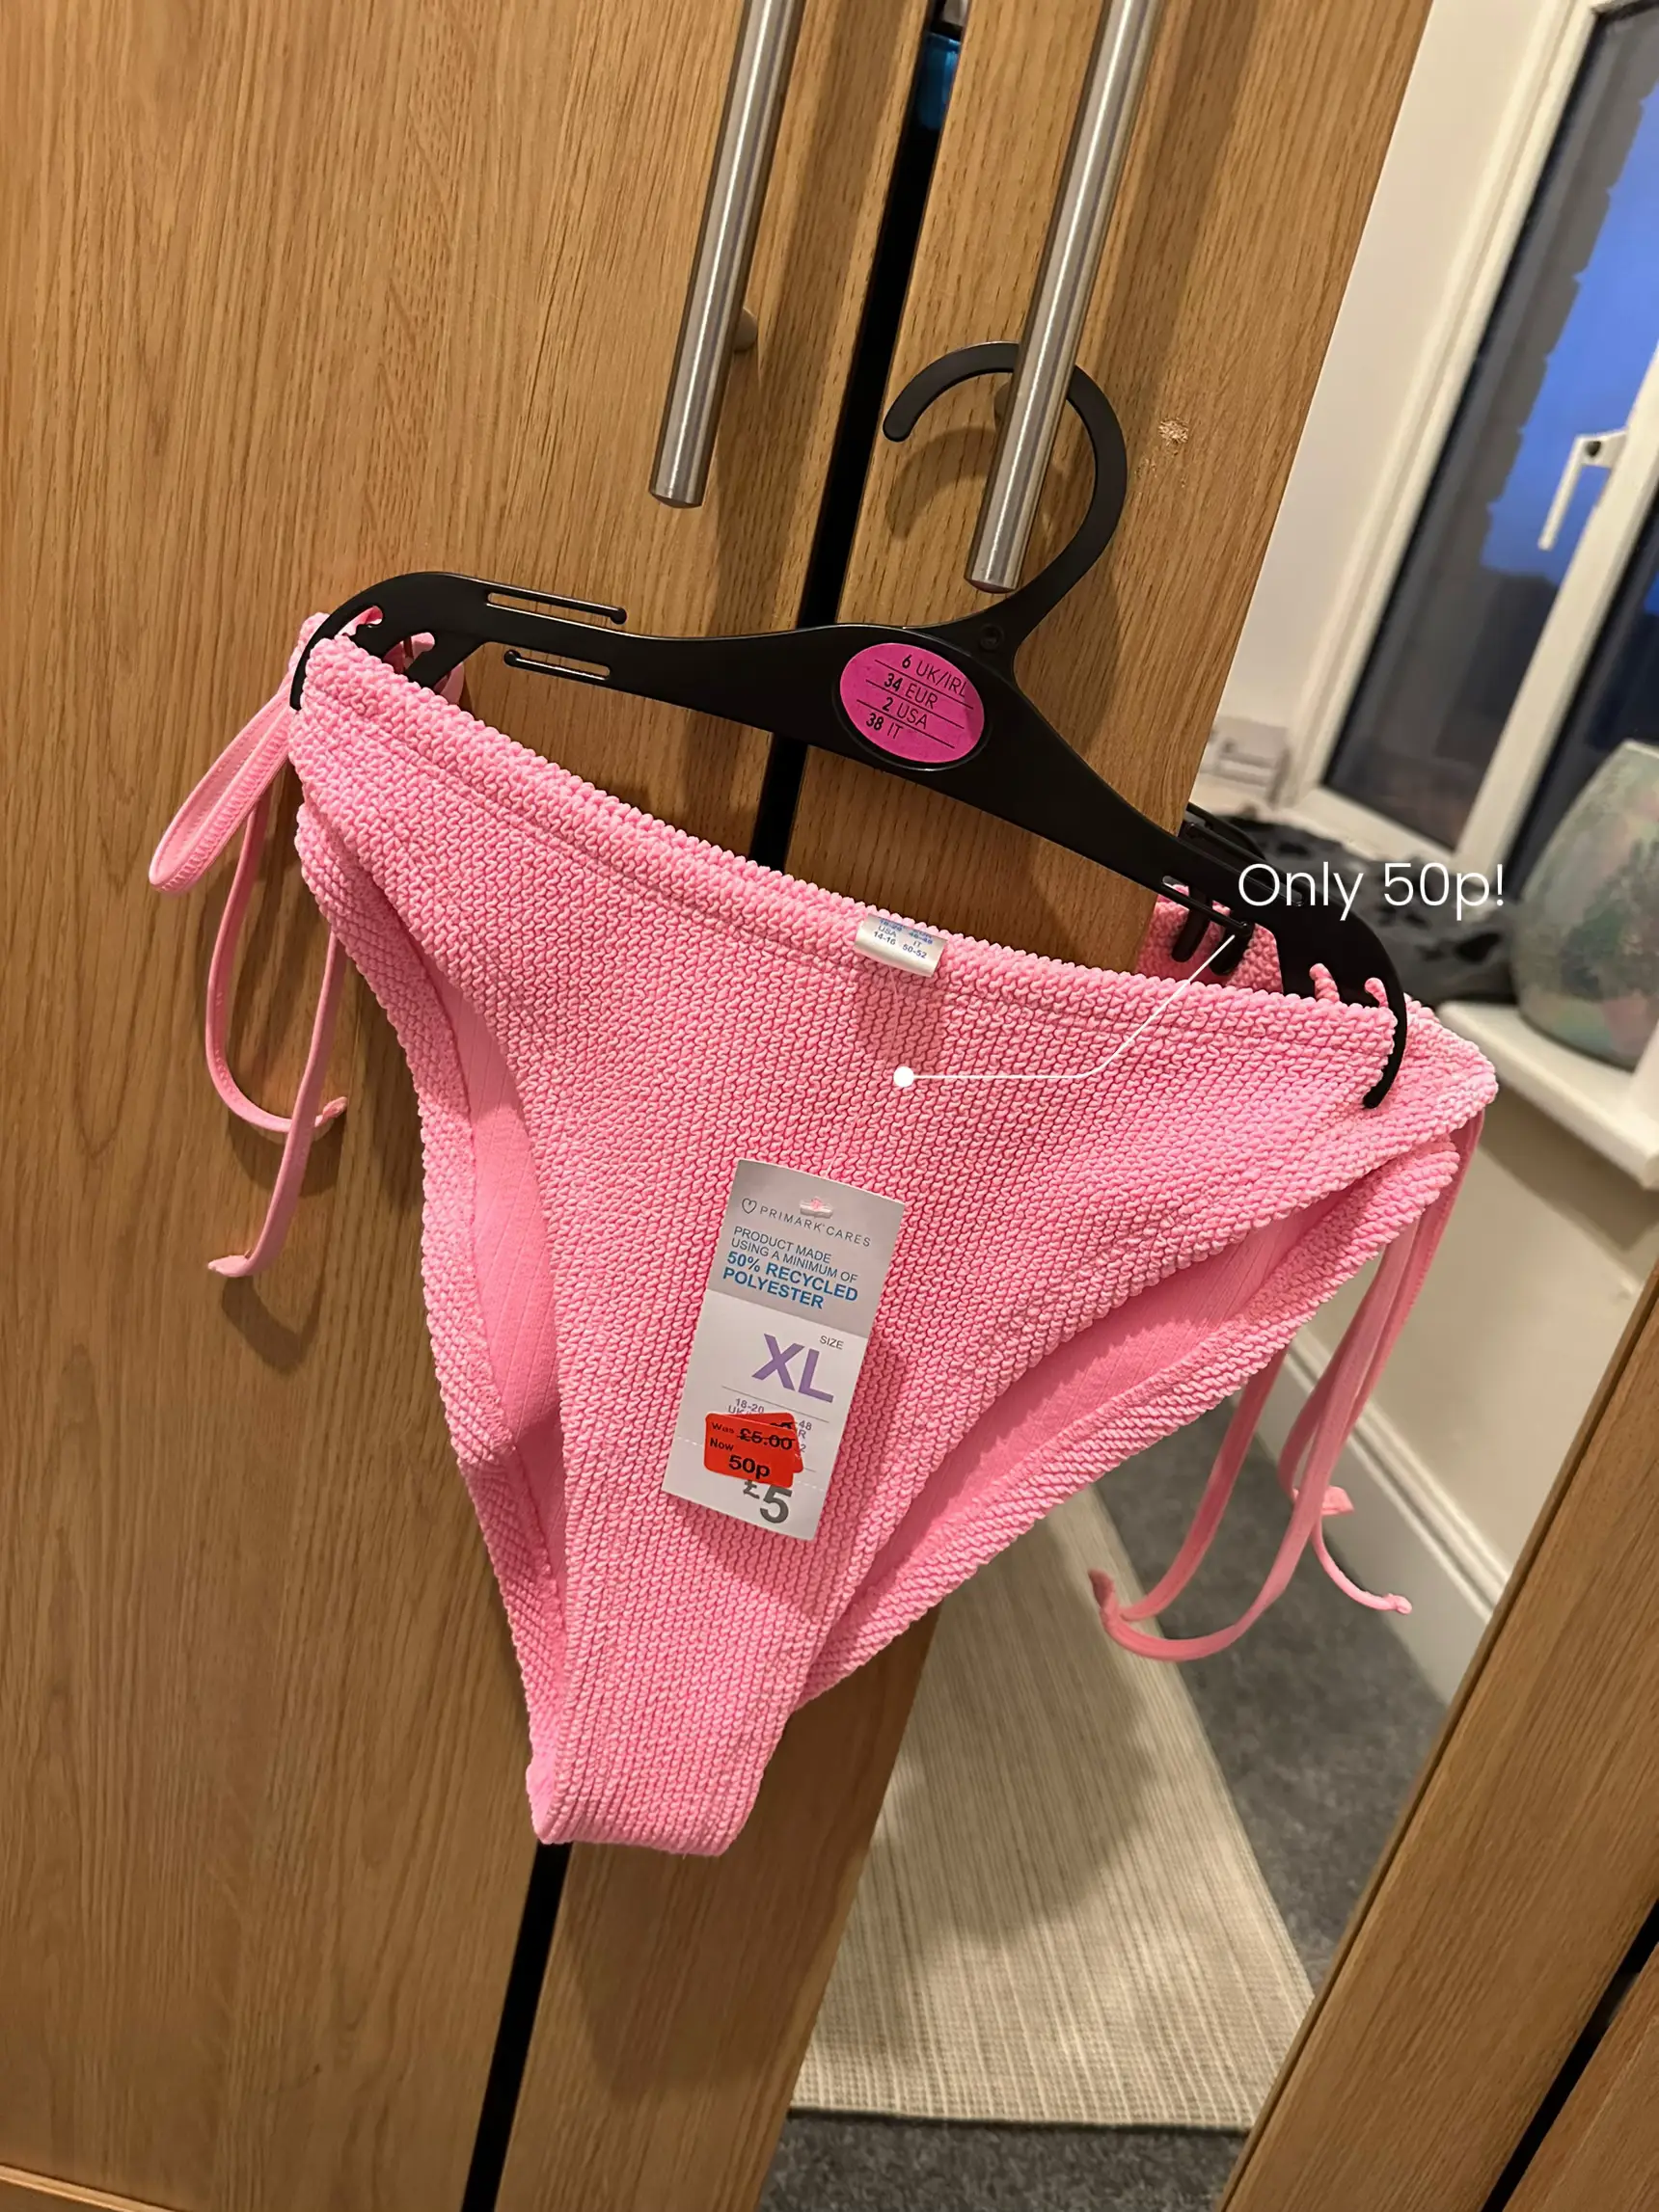 5 Pack Thong Secret Possessions By Primark Size 18-20, Grey, Pink, White